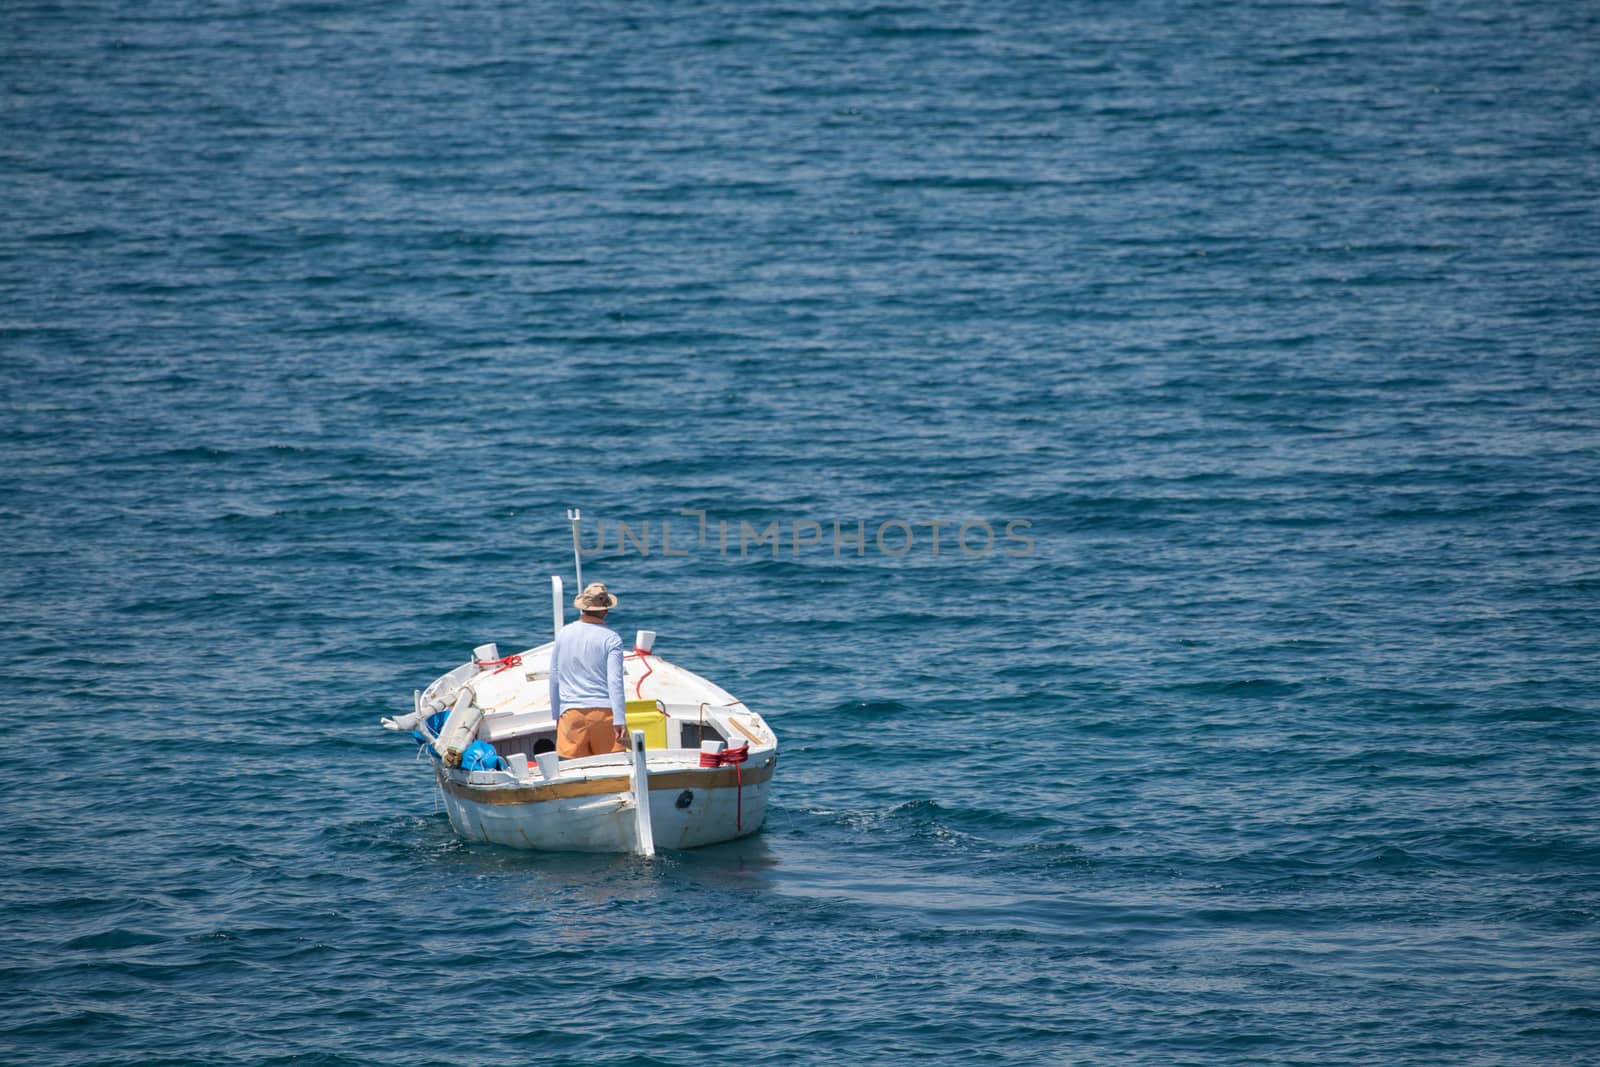 Fisherman in traditional wooden boat at sea, facing awaz from viewer, going out to sea, daylight, authentic and unstaged, mediterranean style, could be Italy, Greece, Croatia or Adriatic sea